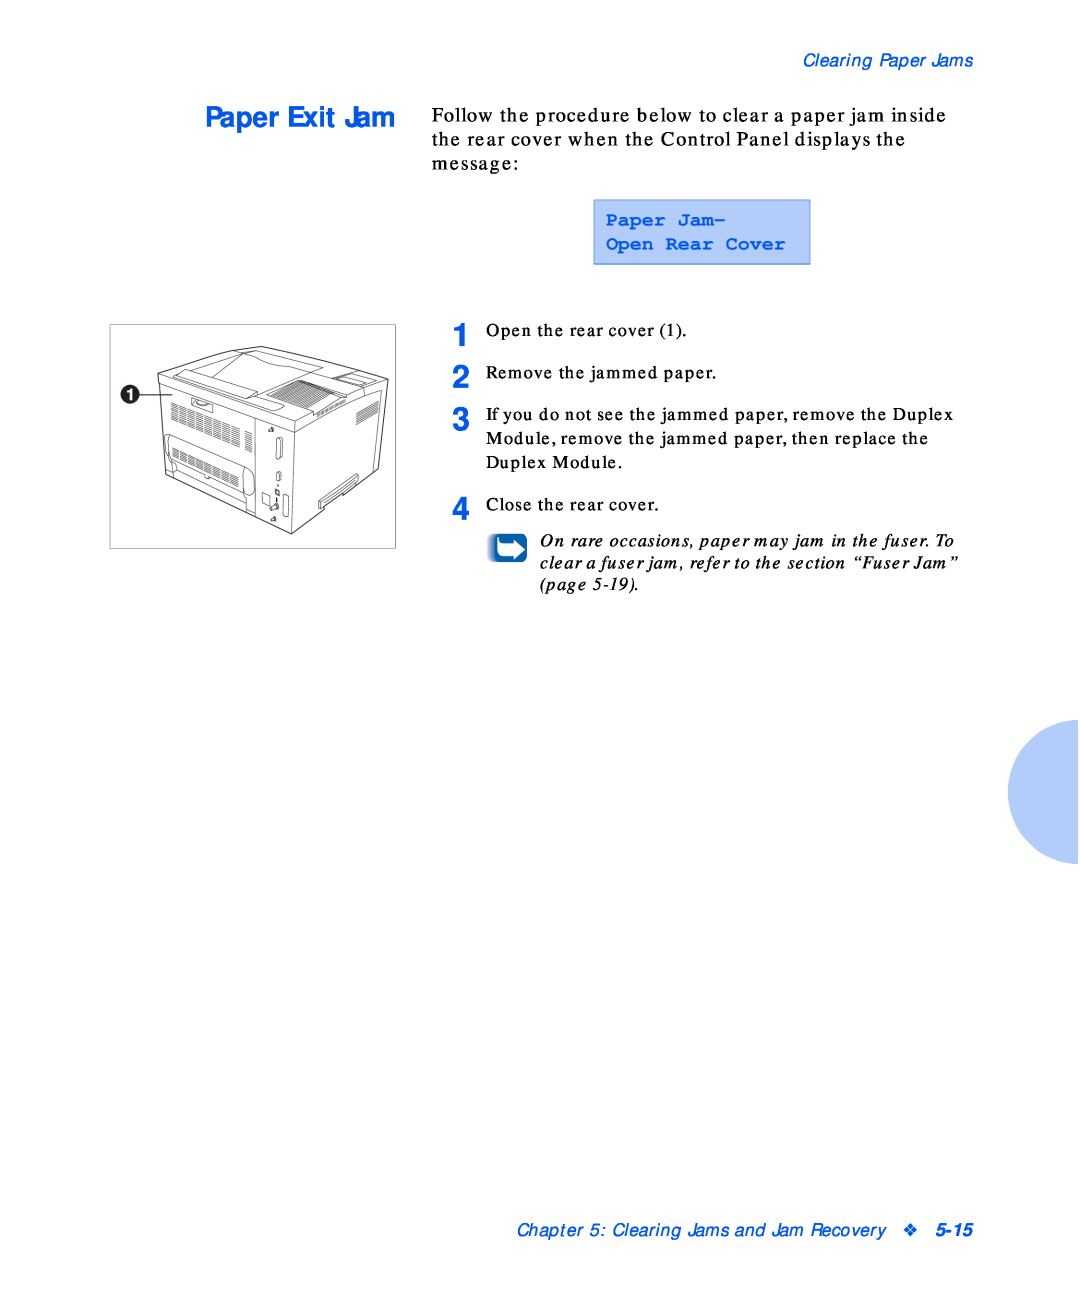 Xerox N17b manual Paper Exit Jam, message, Clearing Jams and Jam Recovery, Clearing Paper Jams 